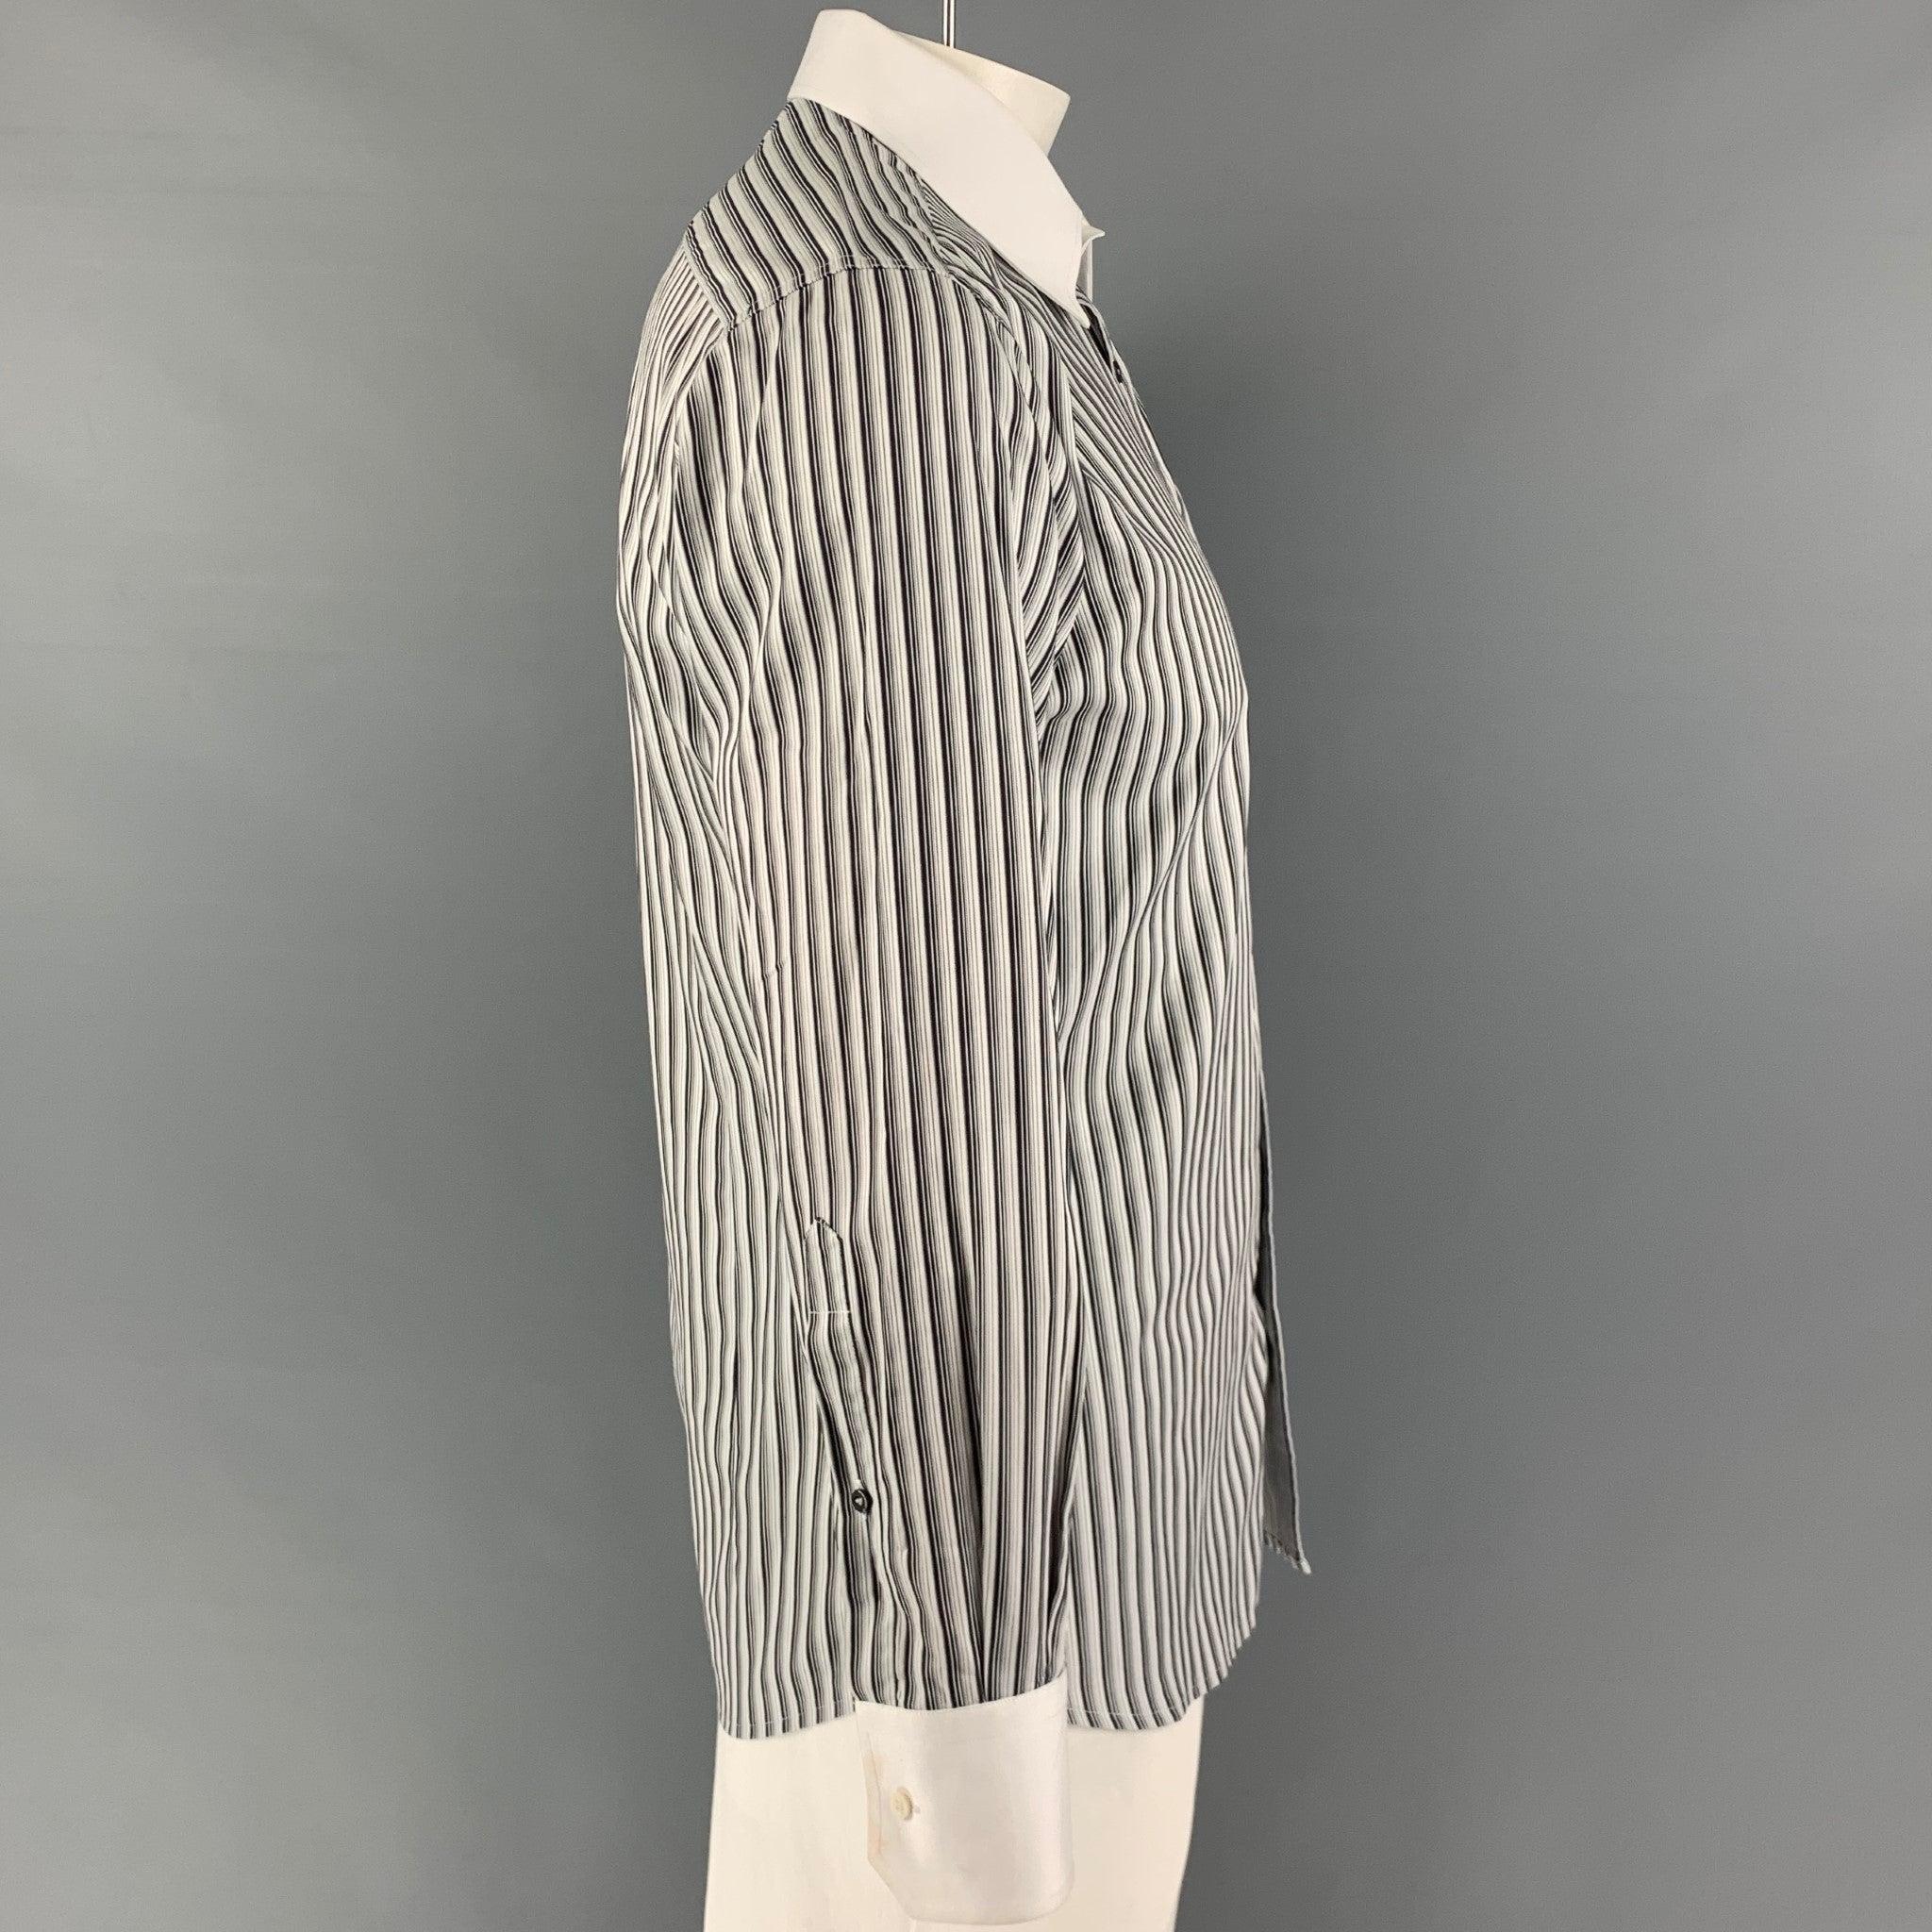 GUCCI long sleeve shirt comes in a white & black stripe cotton featuring a spread collar and a button up closure. Made in Italy.
Good Pre-Owned Condition. Minor discoloration. As-is.  

Marked:   42/16.5 

Measurements: 
 
Shoulder: 19 inches Chest: